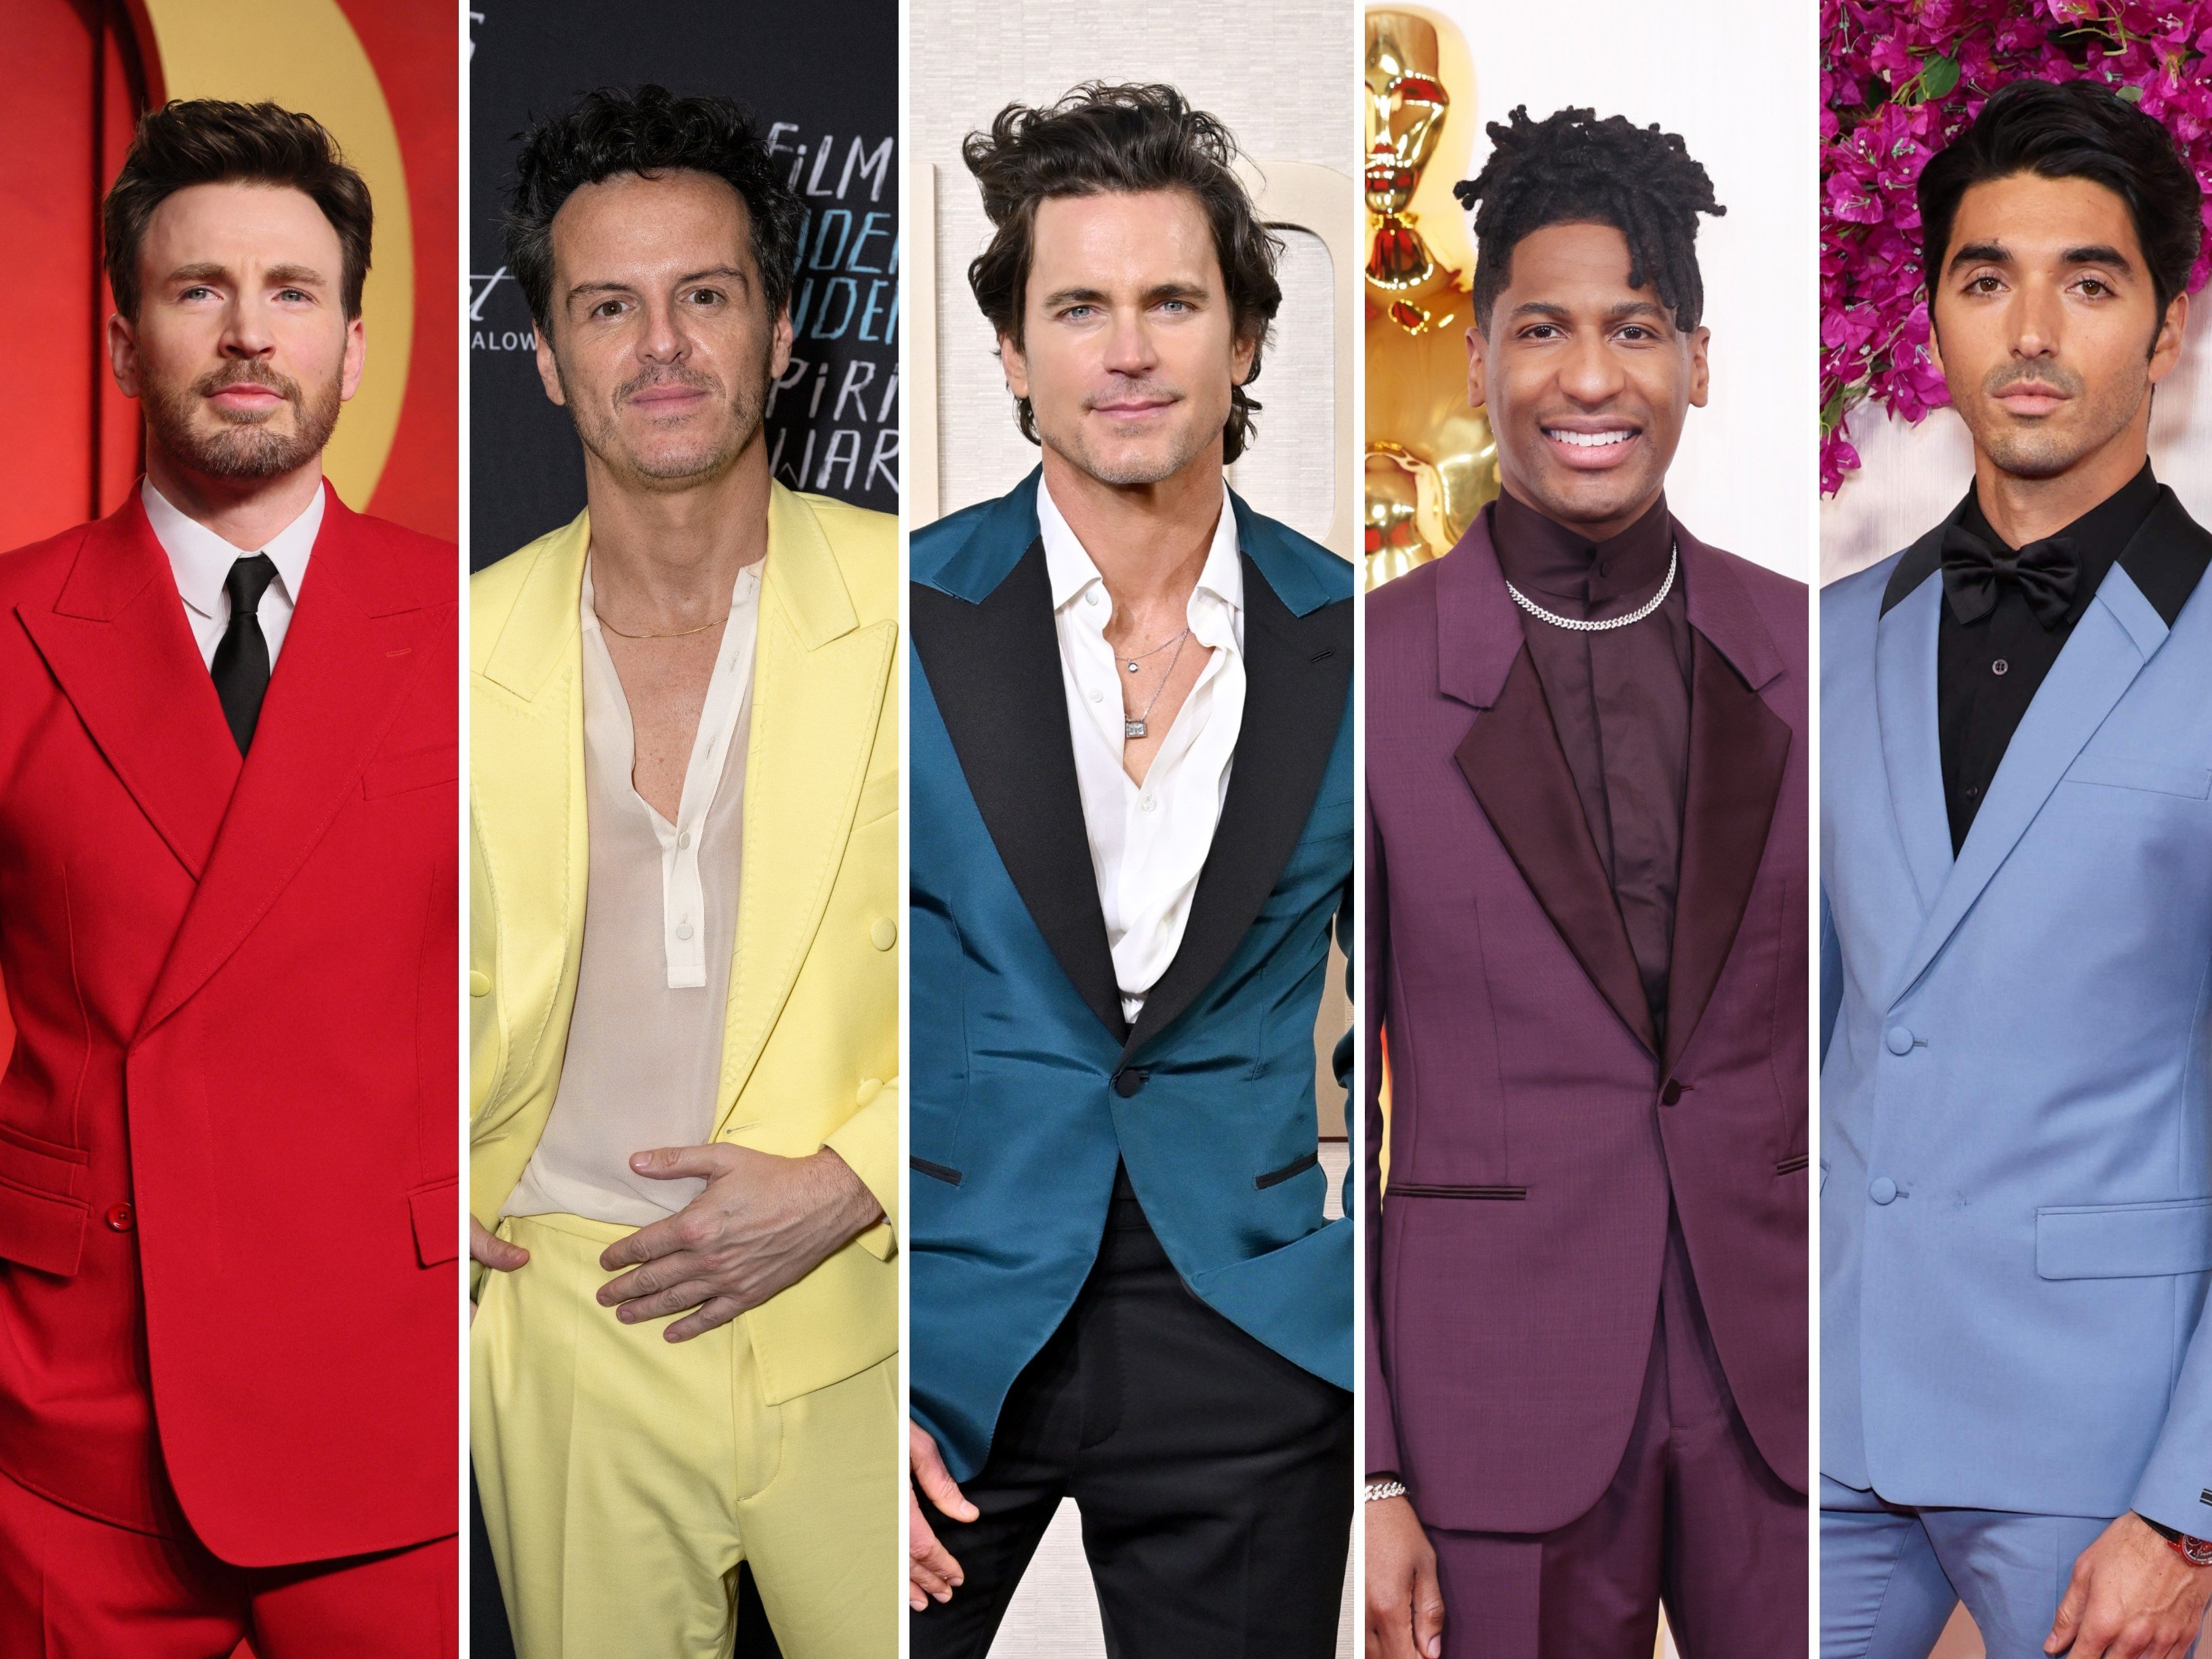 Chris Evans, Andrew Scott, Matt Bomer, Jon Batiste and Taylor Zakhar Perez brought the colour to award season with their Oscar and Golden Globe suits. But who wore it best? Photo: Getty/FilmMagic/Reuters 